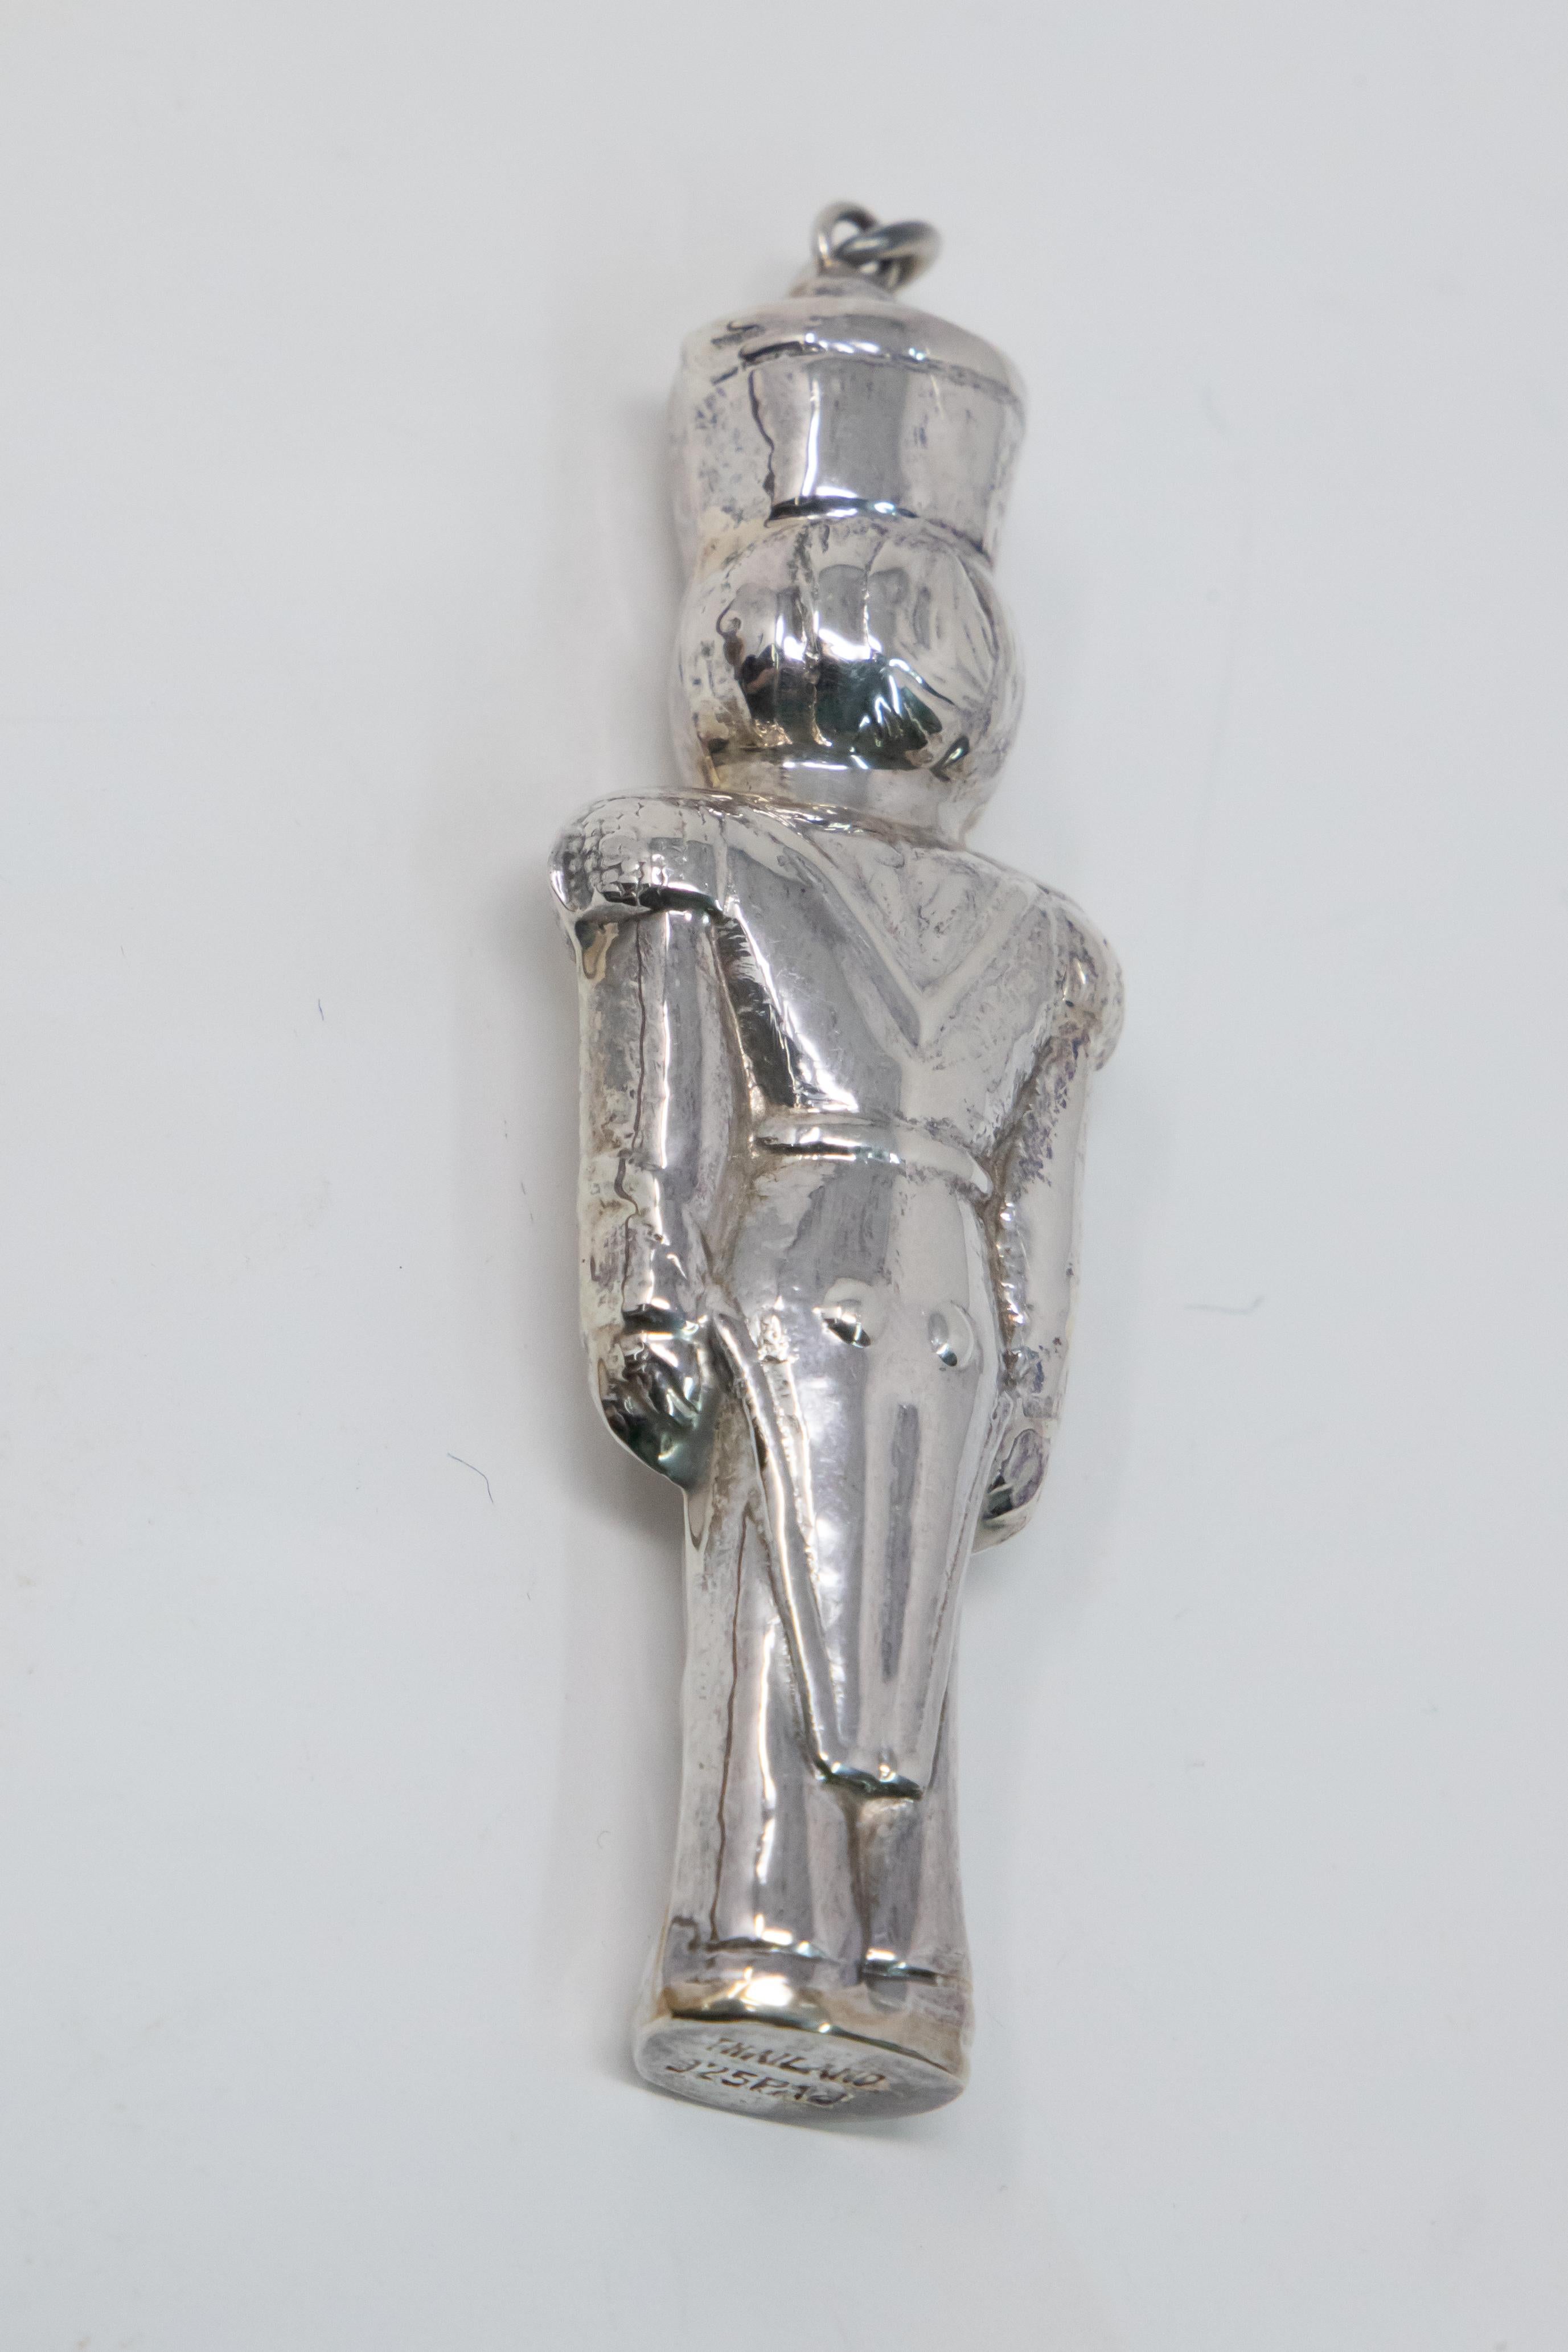 Offering the beautiful toy soldier sterling ornament. He is done in a three dimensional way. Simple lines and clean he is depicted standing at attention with arms to his sides. The bottom is marked Thailand, 925, PAJ.